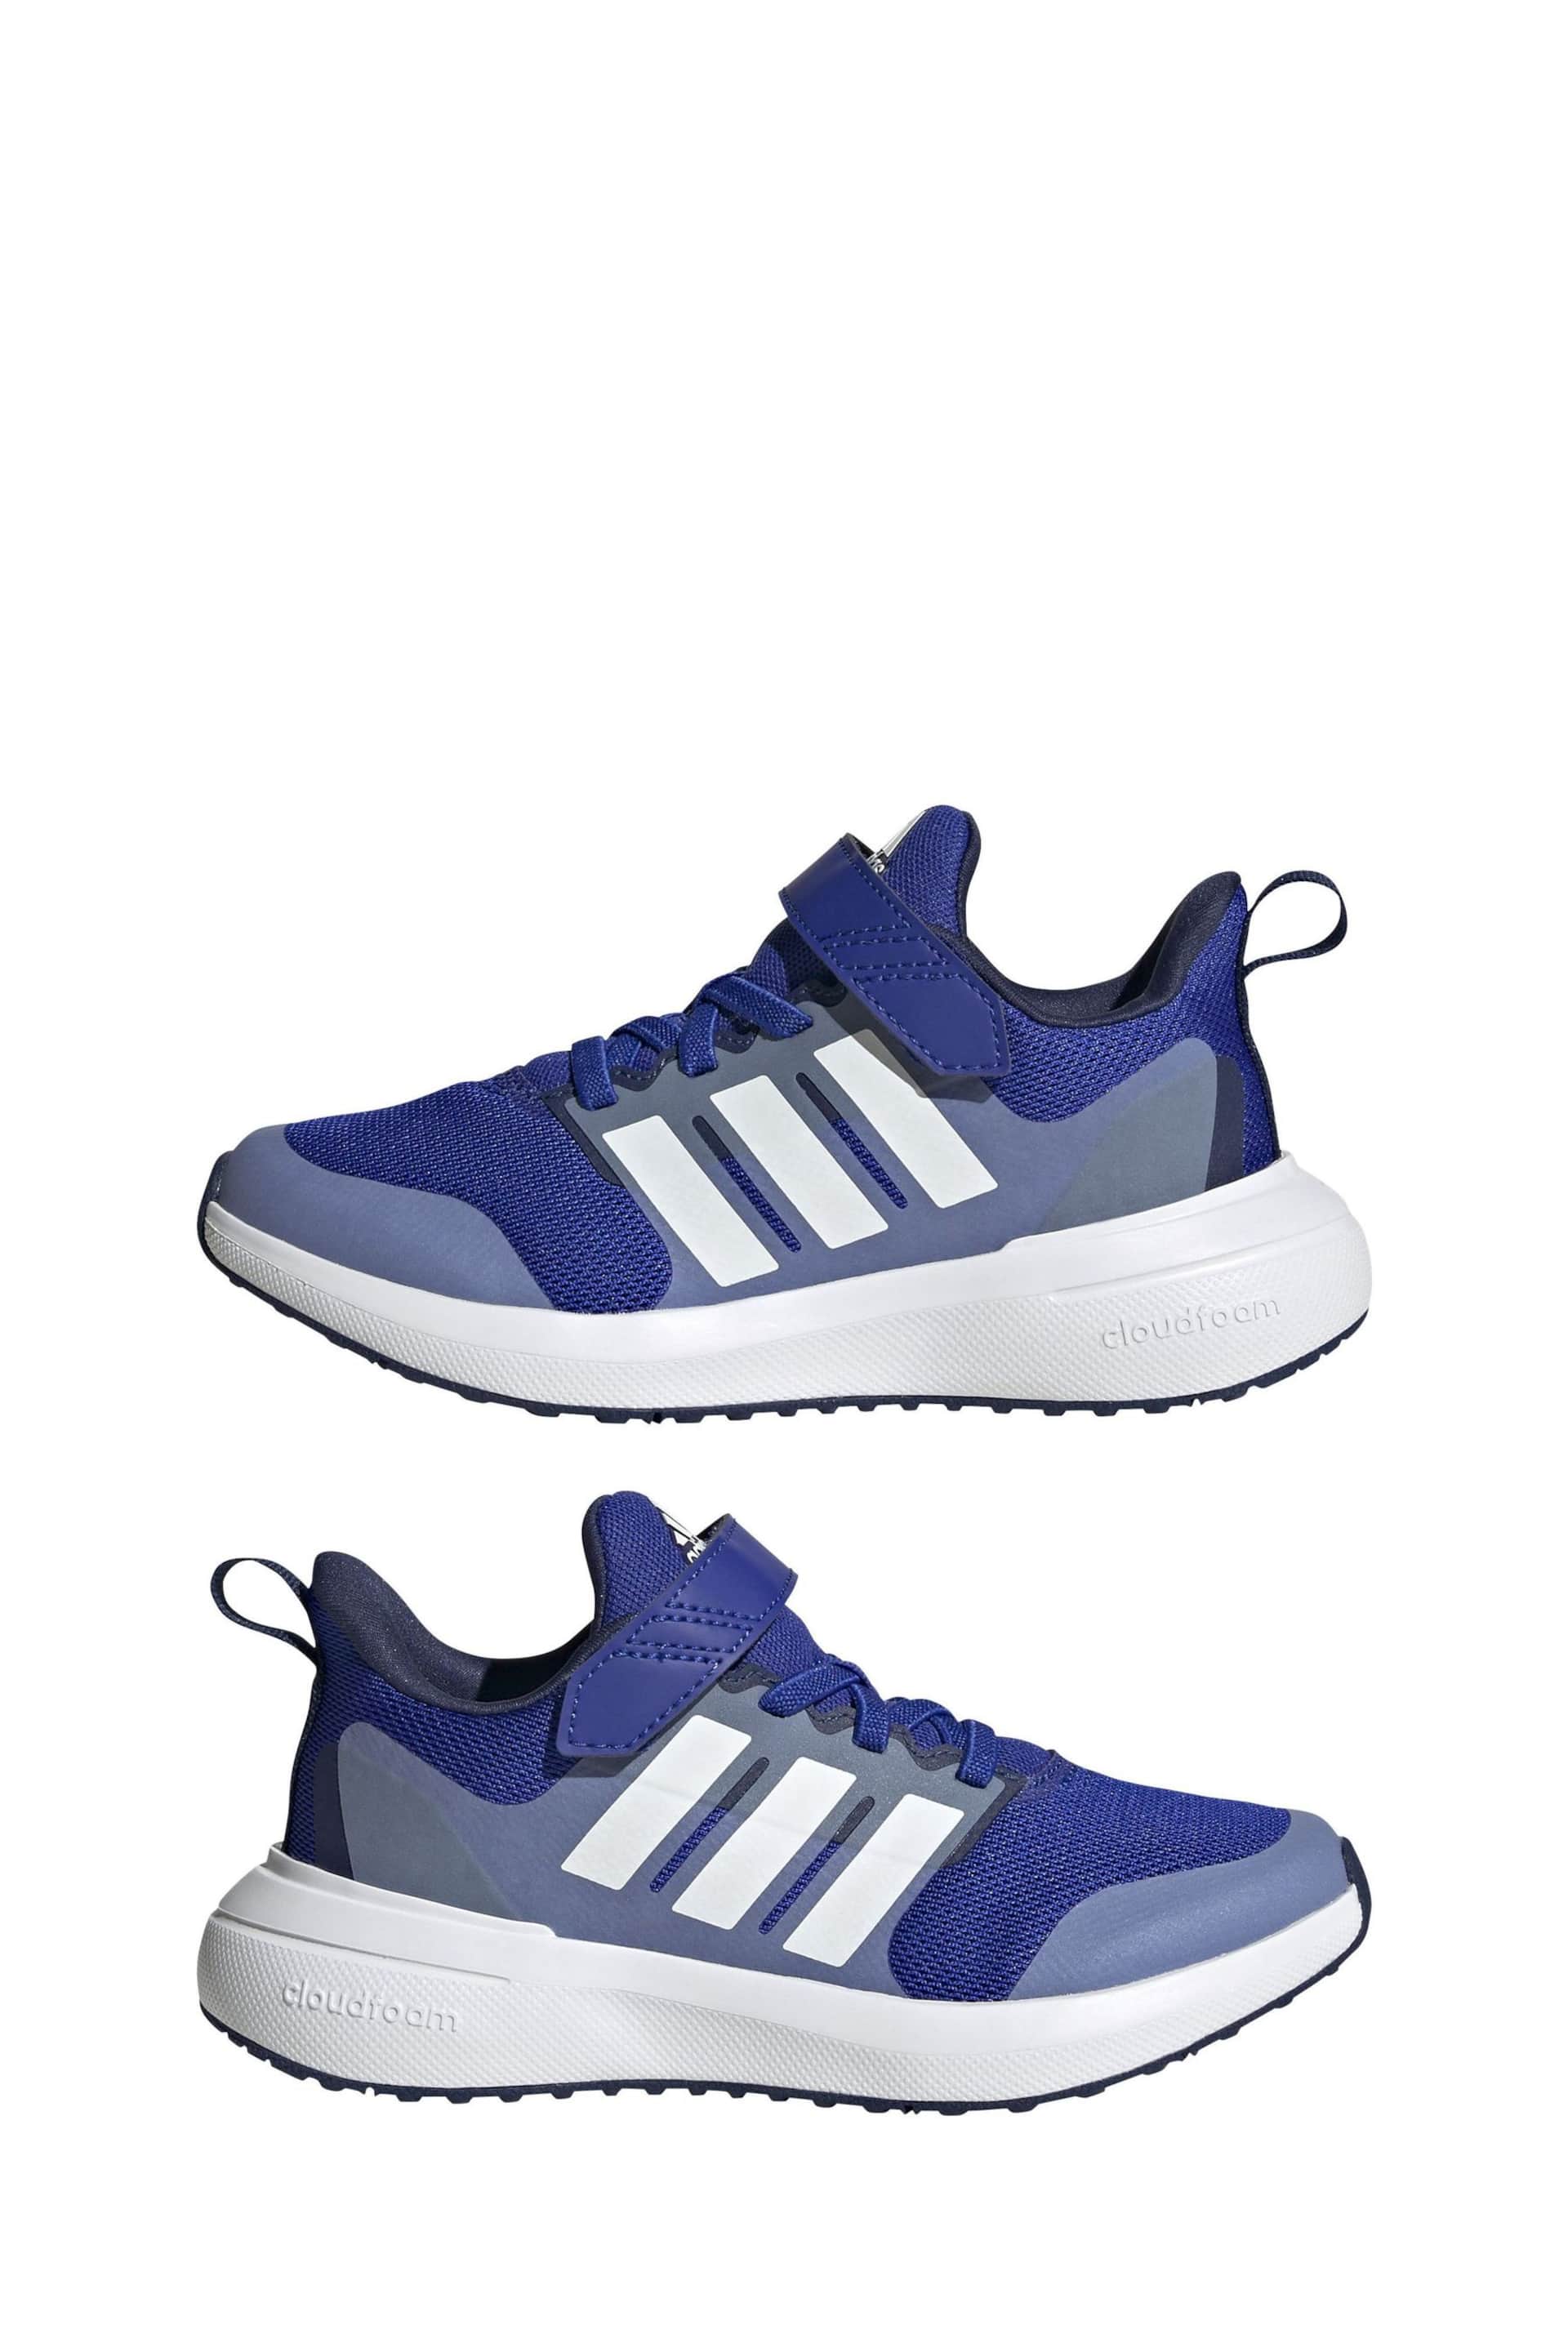 adidas Blue/White Kids Sportswear Fortarun 2.0 Cloudfoam Elastic Lace Top Strap Trainers - Image 5 of 8